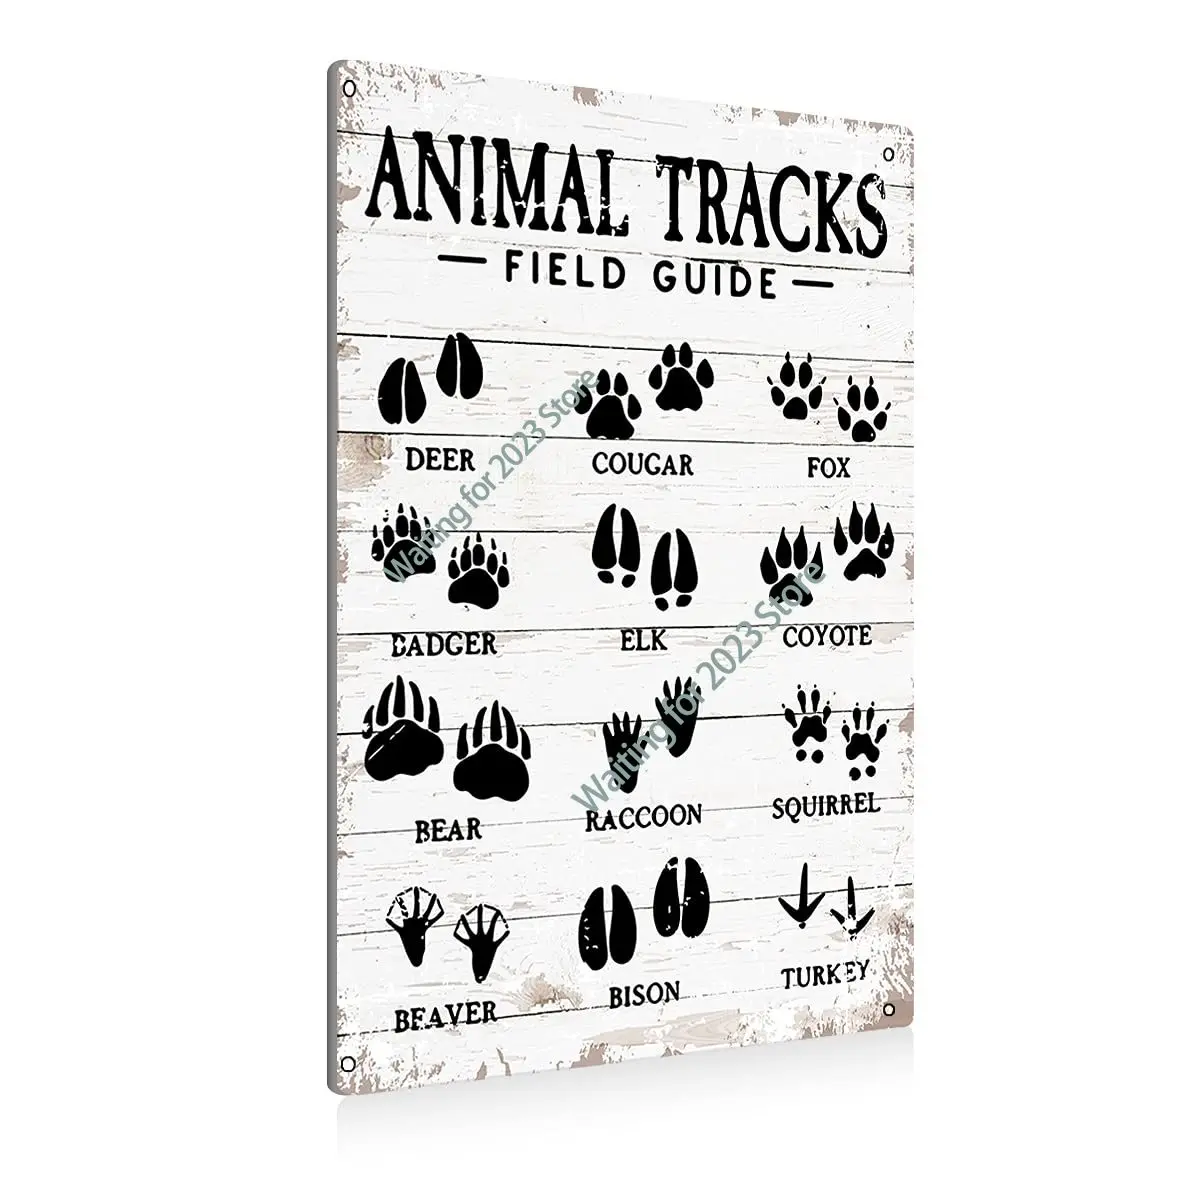 

Animal Tracks Field Guide Sign Metal Tin Sign Wall Art Decor Farmhouse Home Rustic Decor Gifts - 8x12 Inch Room Decoration